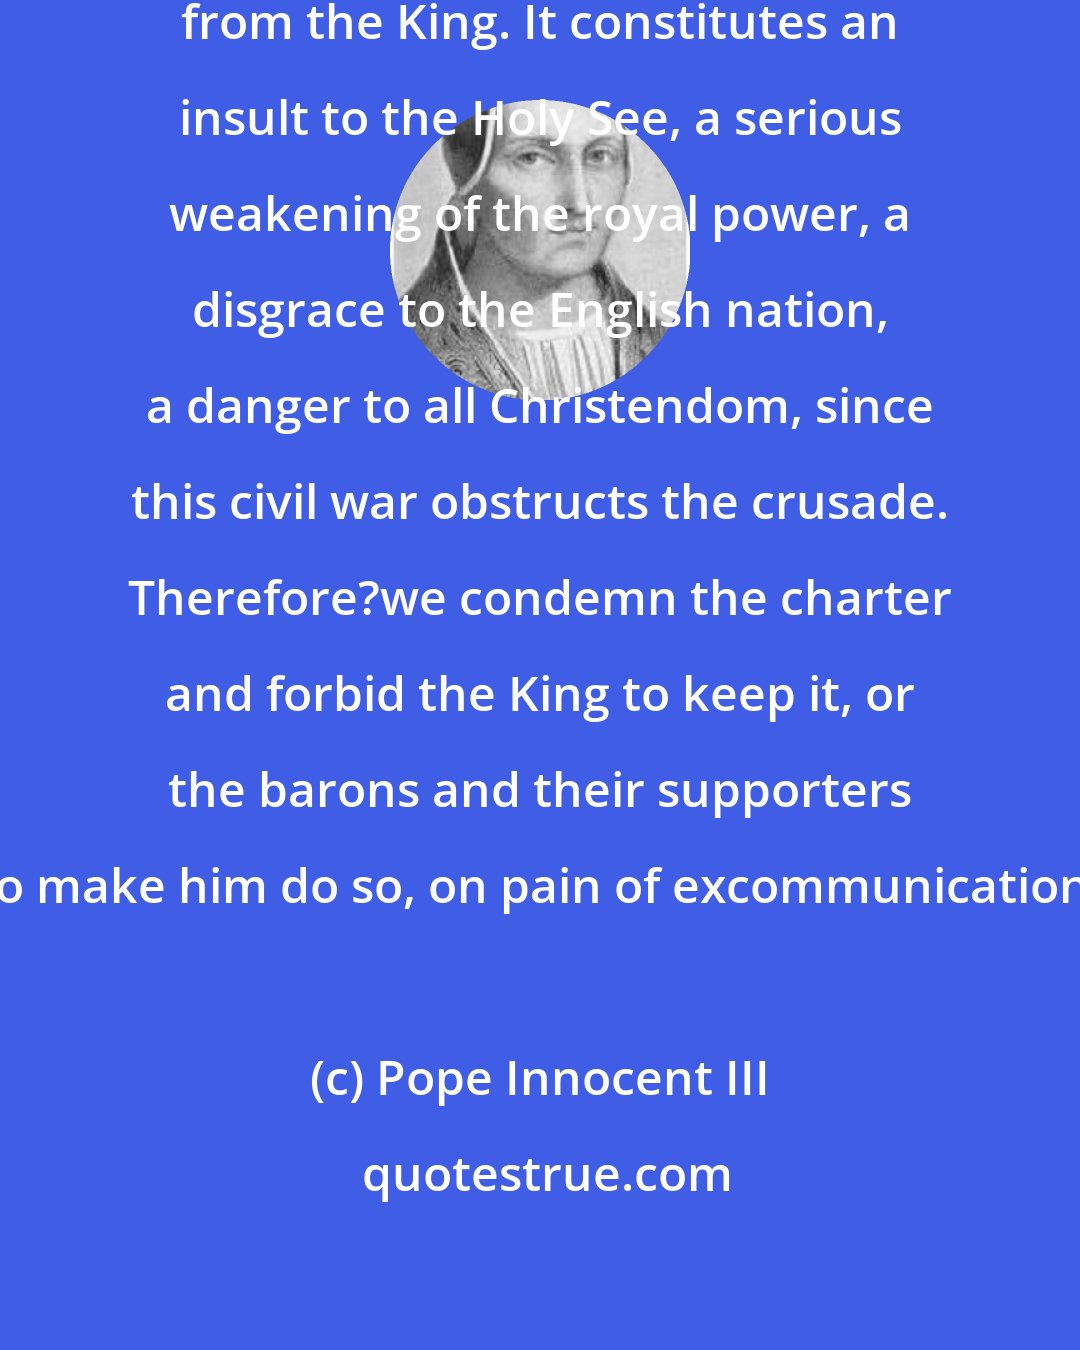 Pope Innocent III: This [Magna Carta] has been forced from the King. It constitutes an insult to the Holy See, a serious weakening of the royal power, a disgrace to the English nation, a danger to all Christendom, since this civil war obstructs the crusade. Therefore?we condemn the charter and forbid the King to keep it, or the barons and their supporters to make him do so, on pain of excommunication.